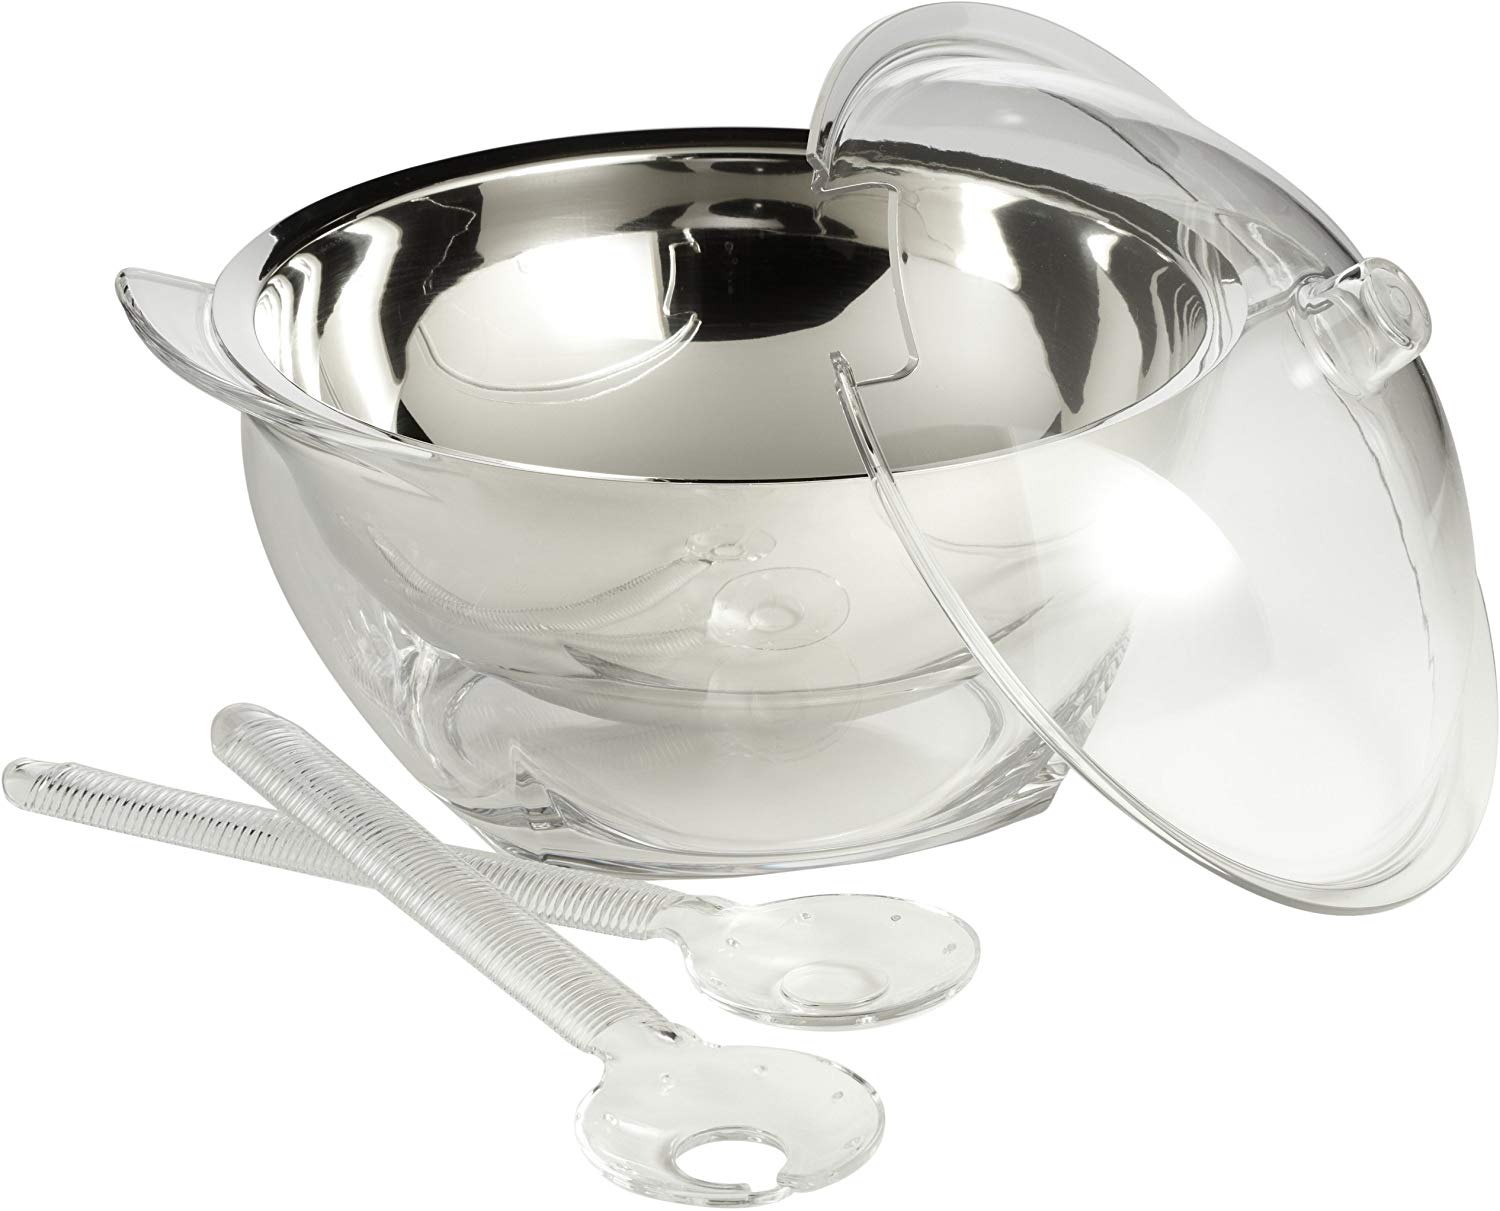 Prodyne Chilled Salad Service Bowl & Spoons